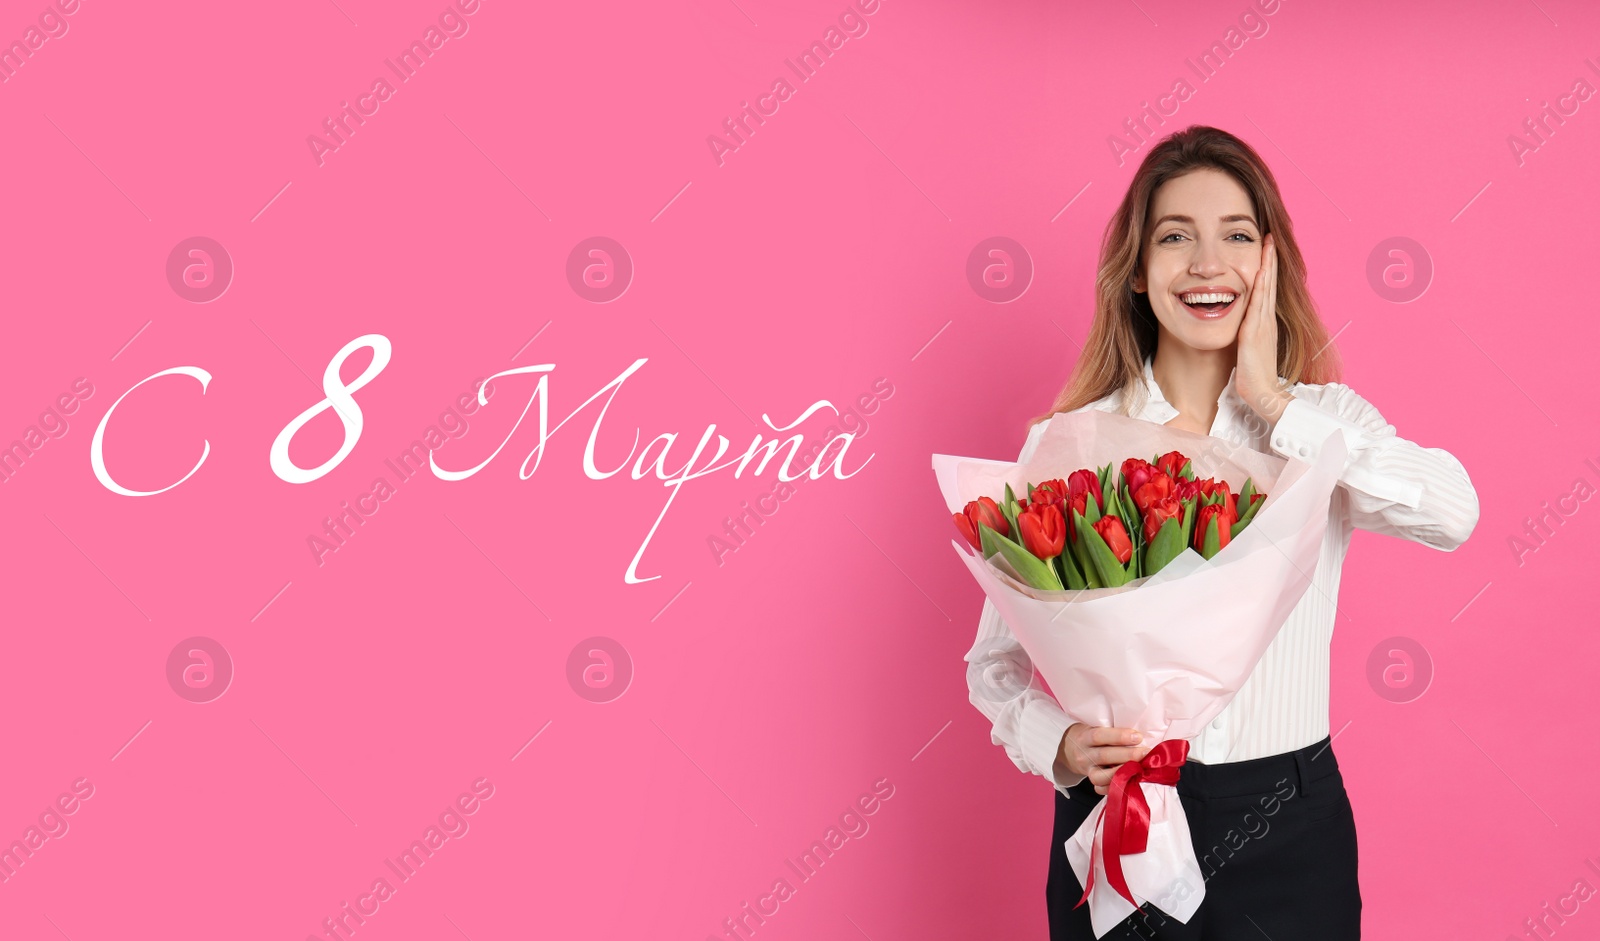 Image of International Women's Day greeting card design. Beautiful young lady with flowers and text Happy 8 March written in Russian on pink background